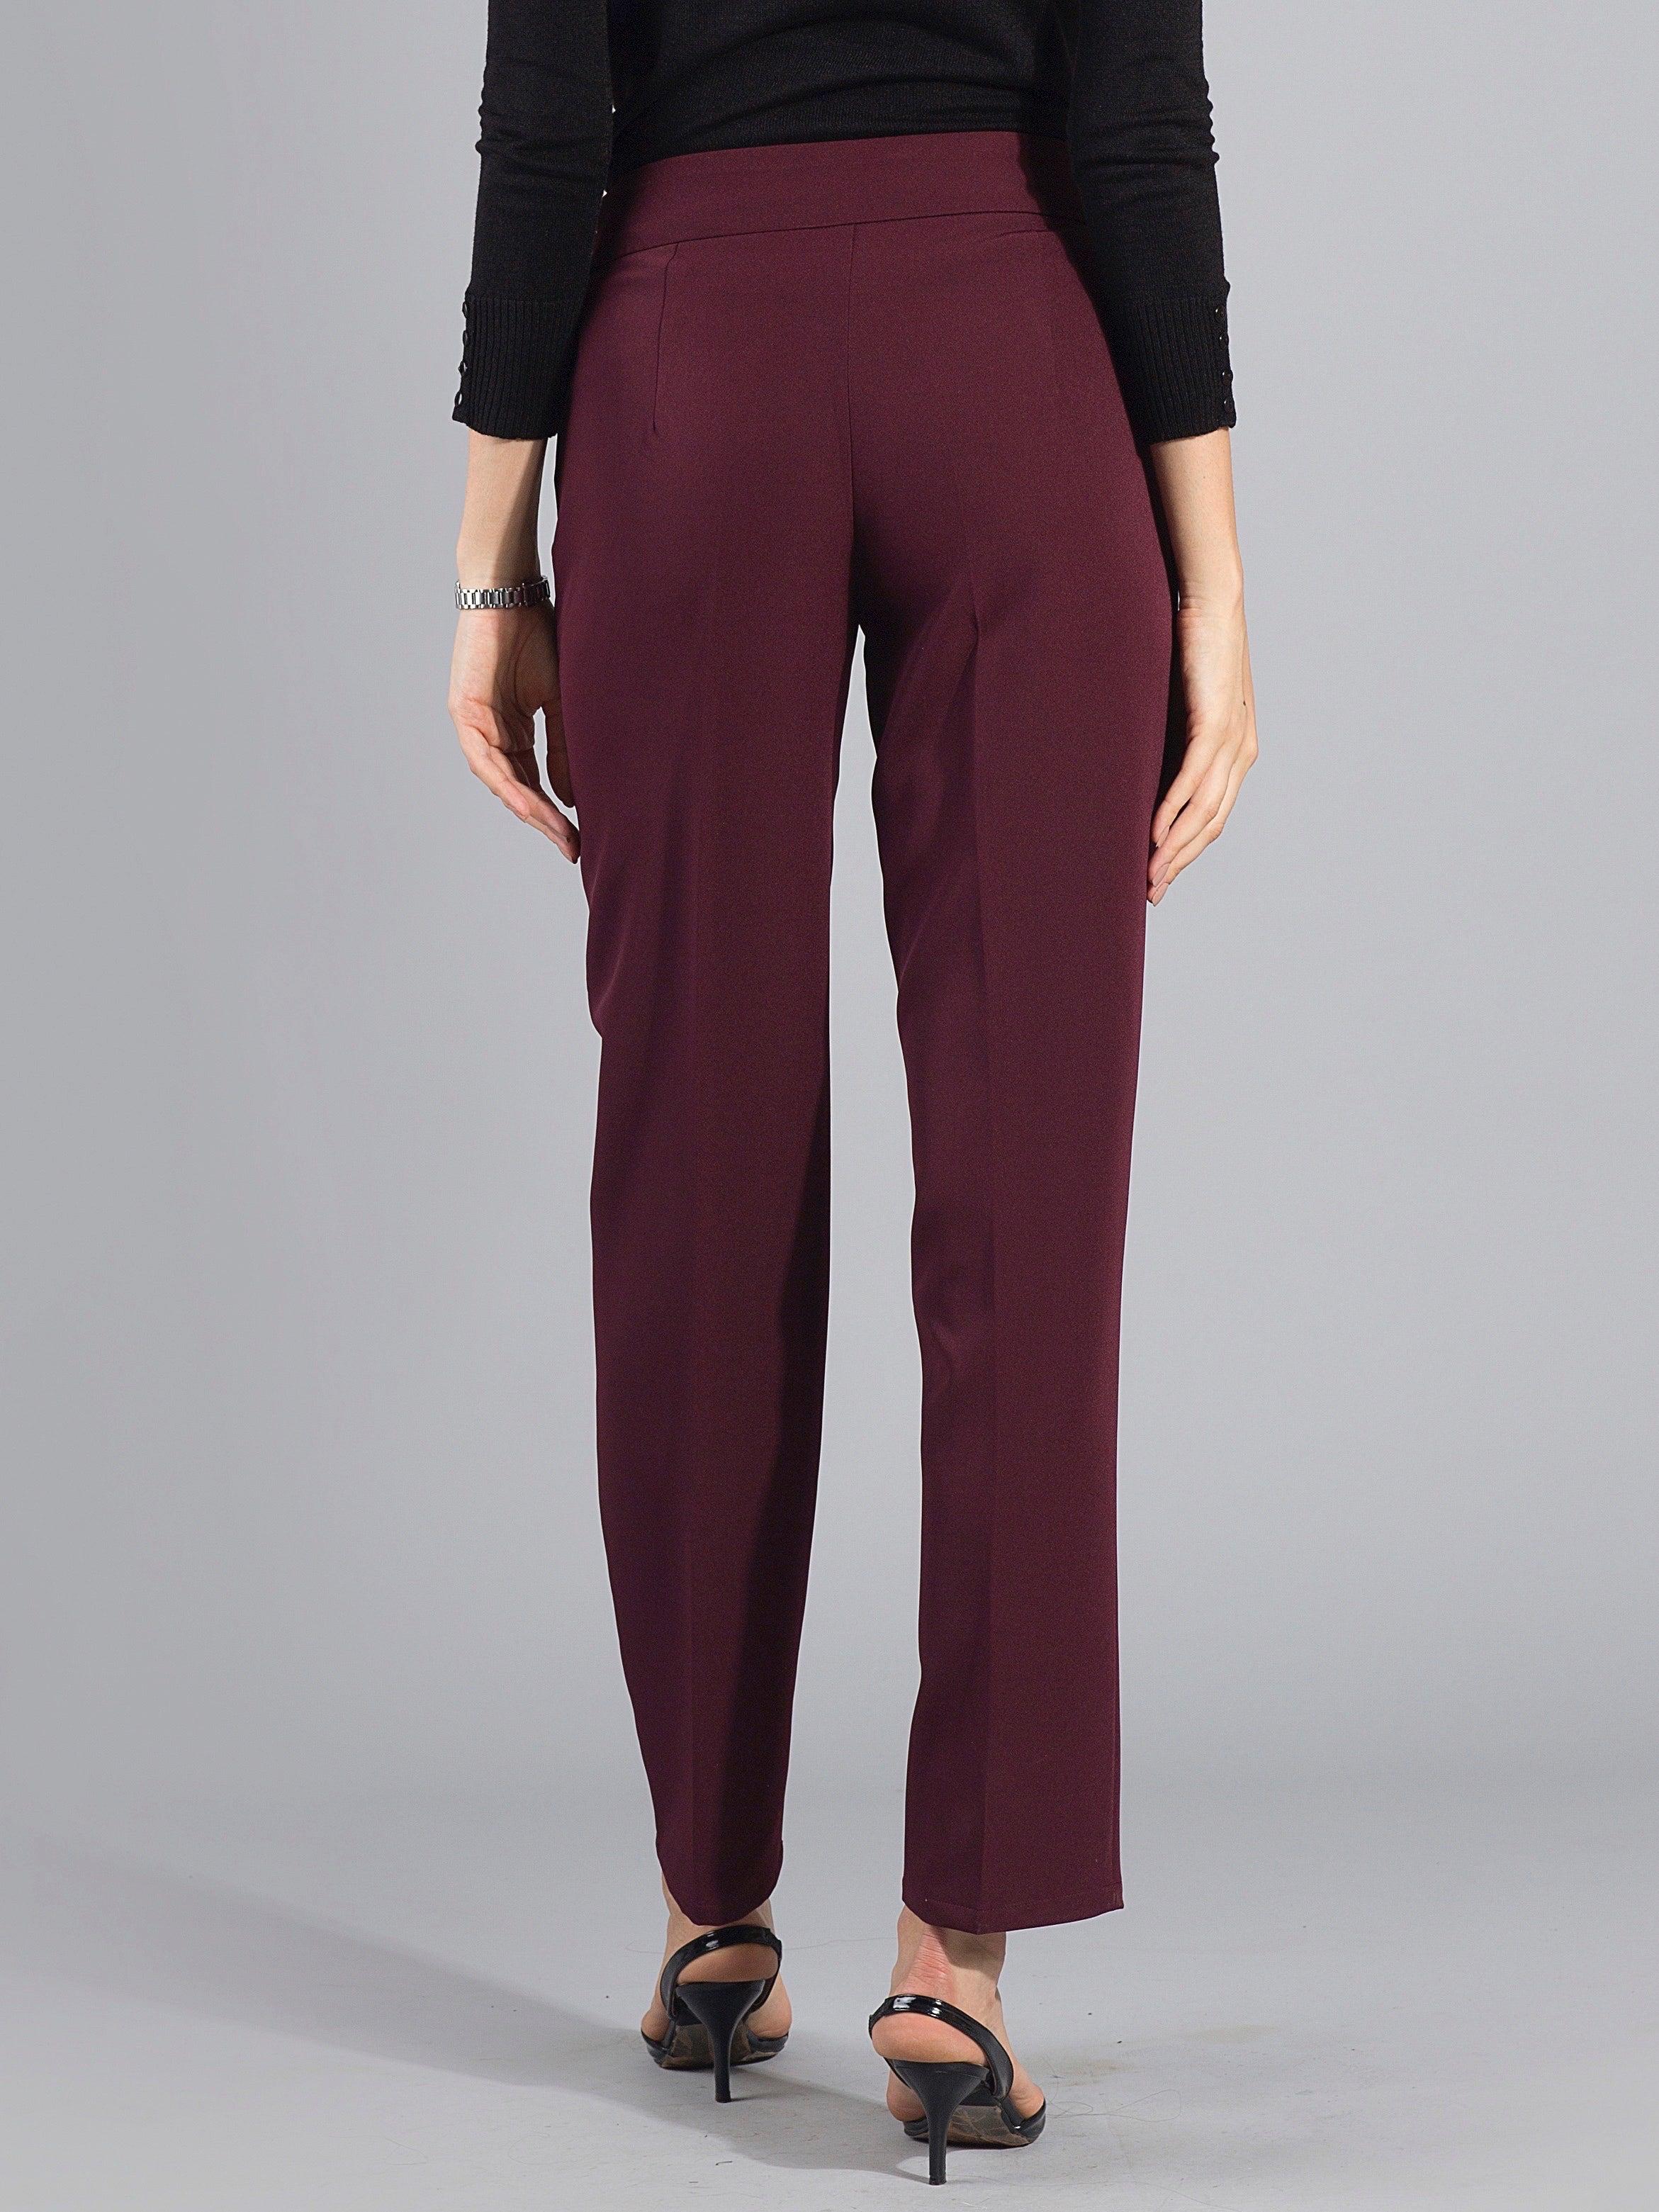 Essential Easy Care Work Trousers - Maroon| Formal Trousers